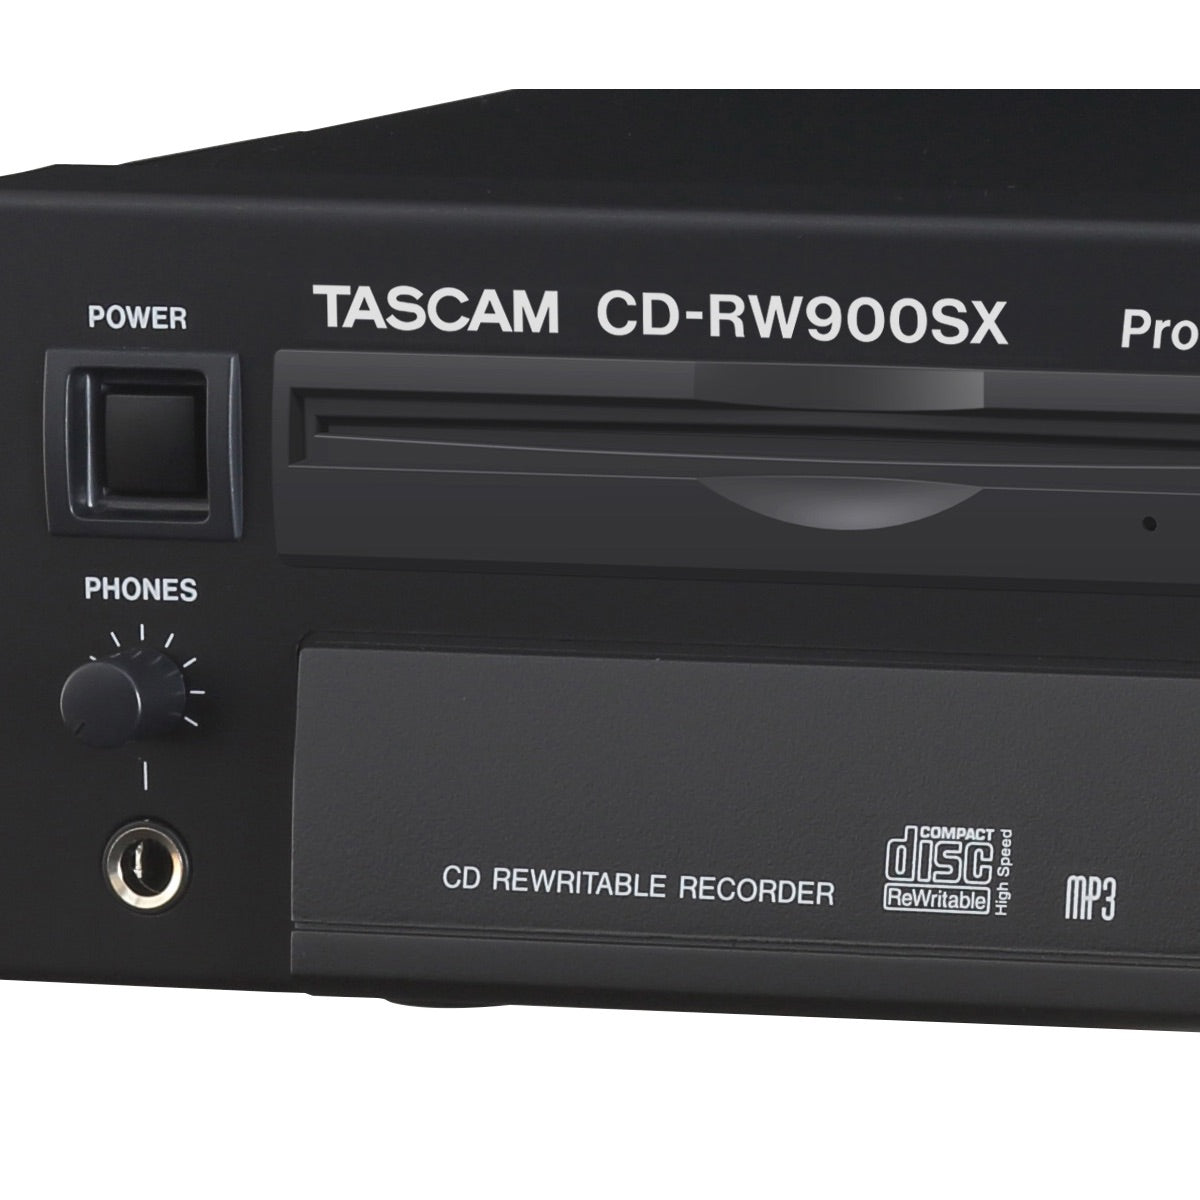 Tascam CD-RW900SX - Professional CD Recorder/Player, emergency eject port